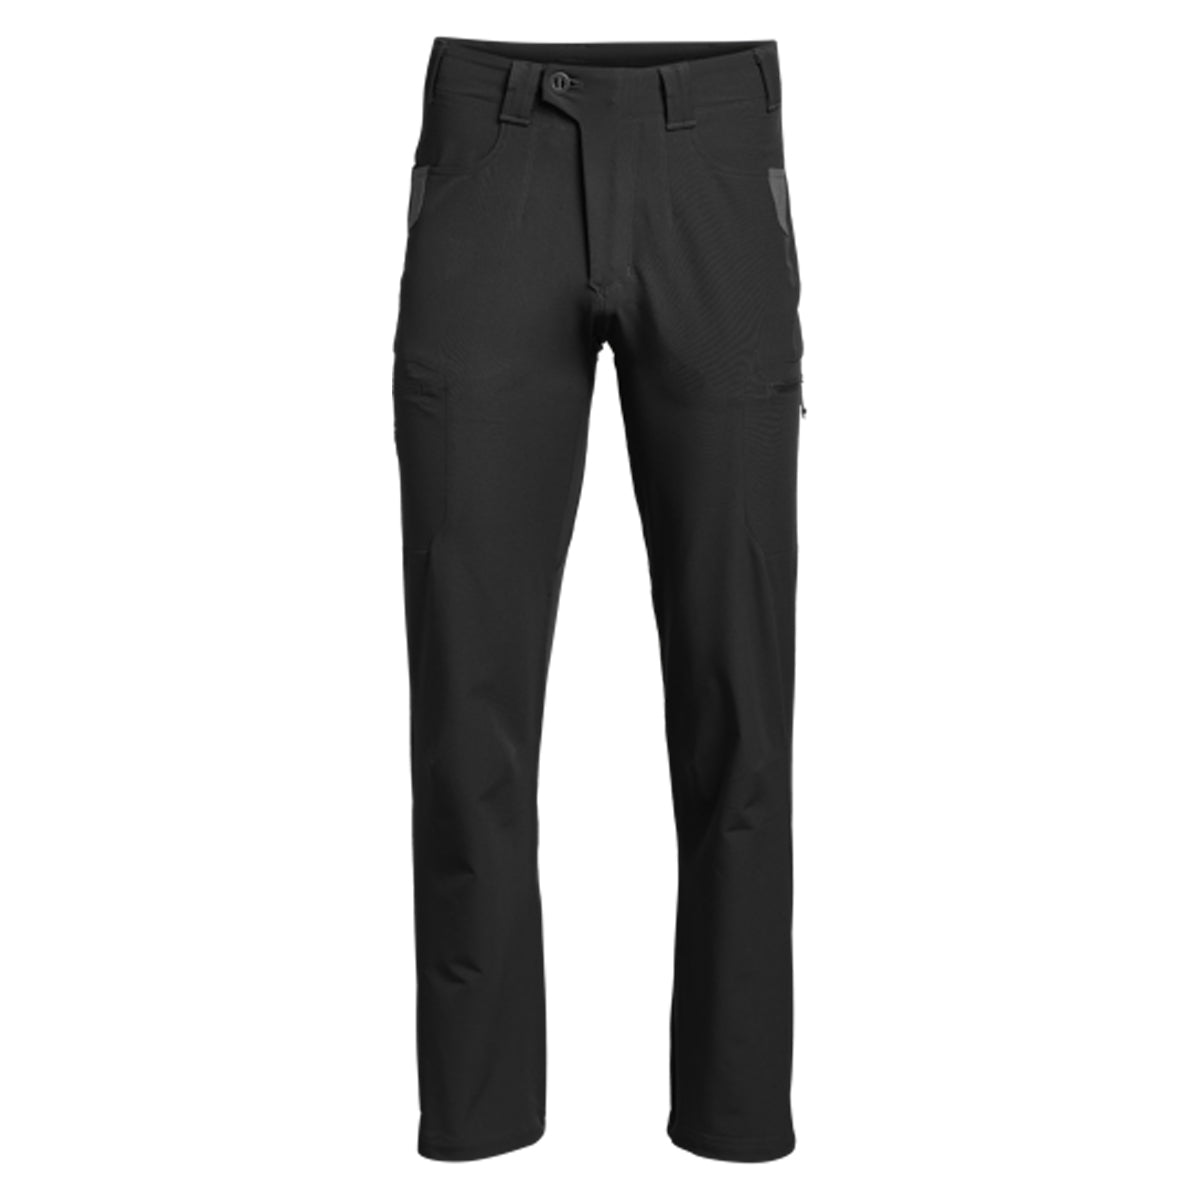 Sitka Traverse Pant in Lead by GOHUNT | Sitka - GOHUNT Shop